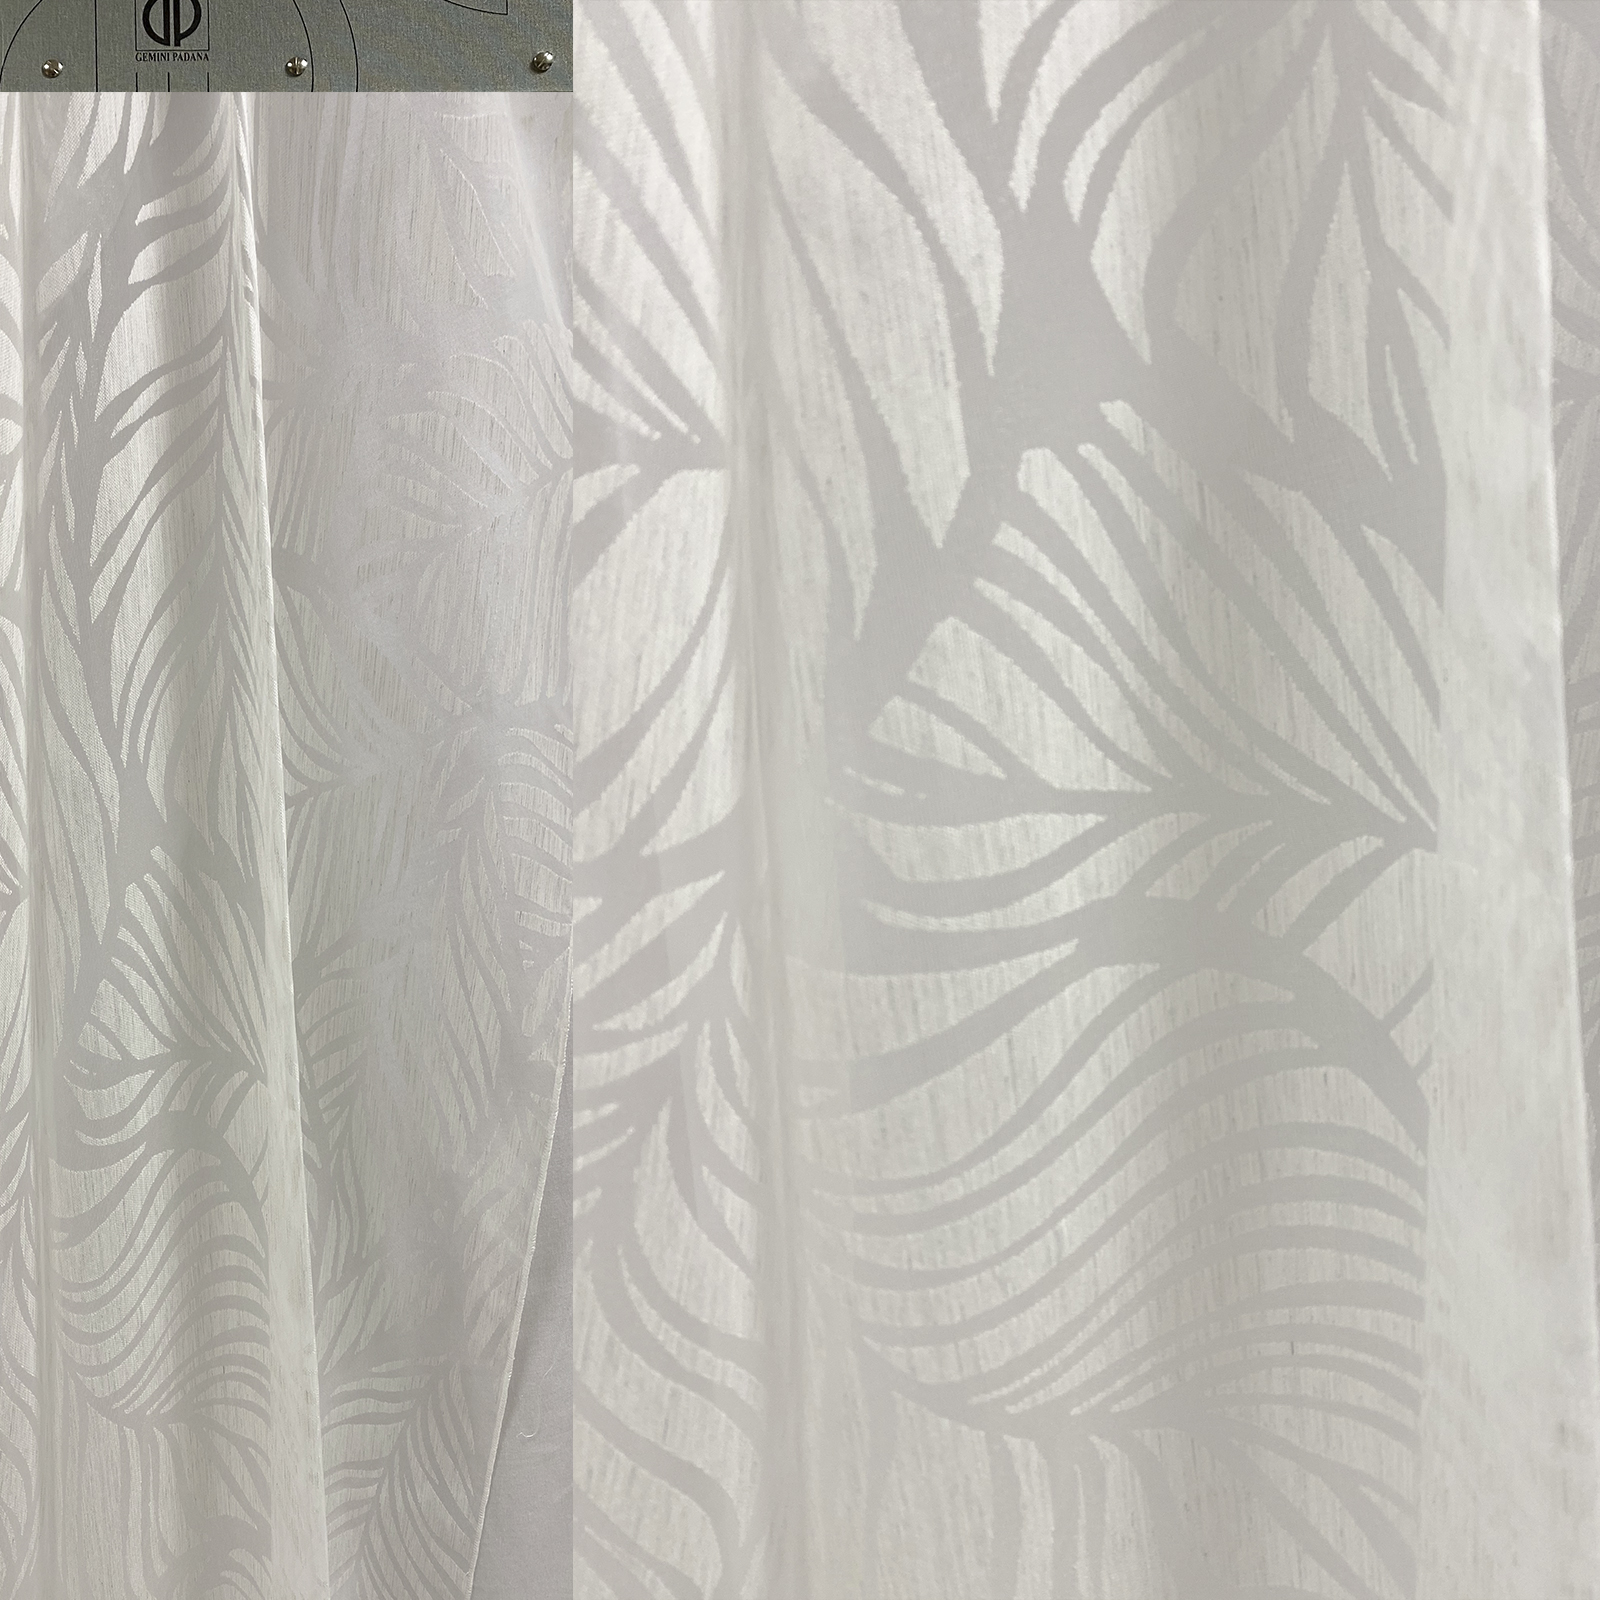 Filtering curtain fabric, floral printed design with devoré technique<br /> 100% Made in Italy fabric. Style modern and trendy with flowers decorations.

 Treatments: standard. Type of workings: Devore. 